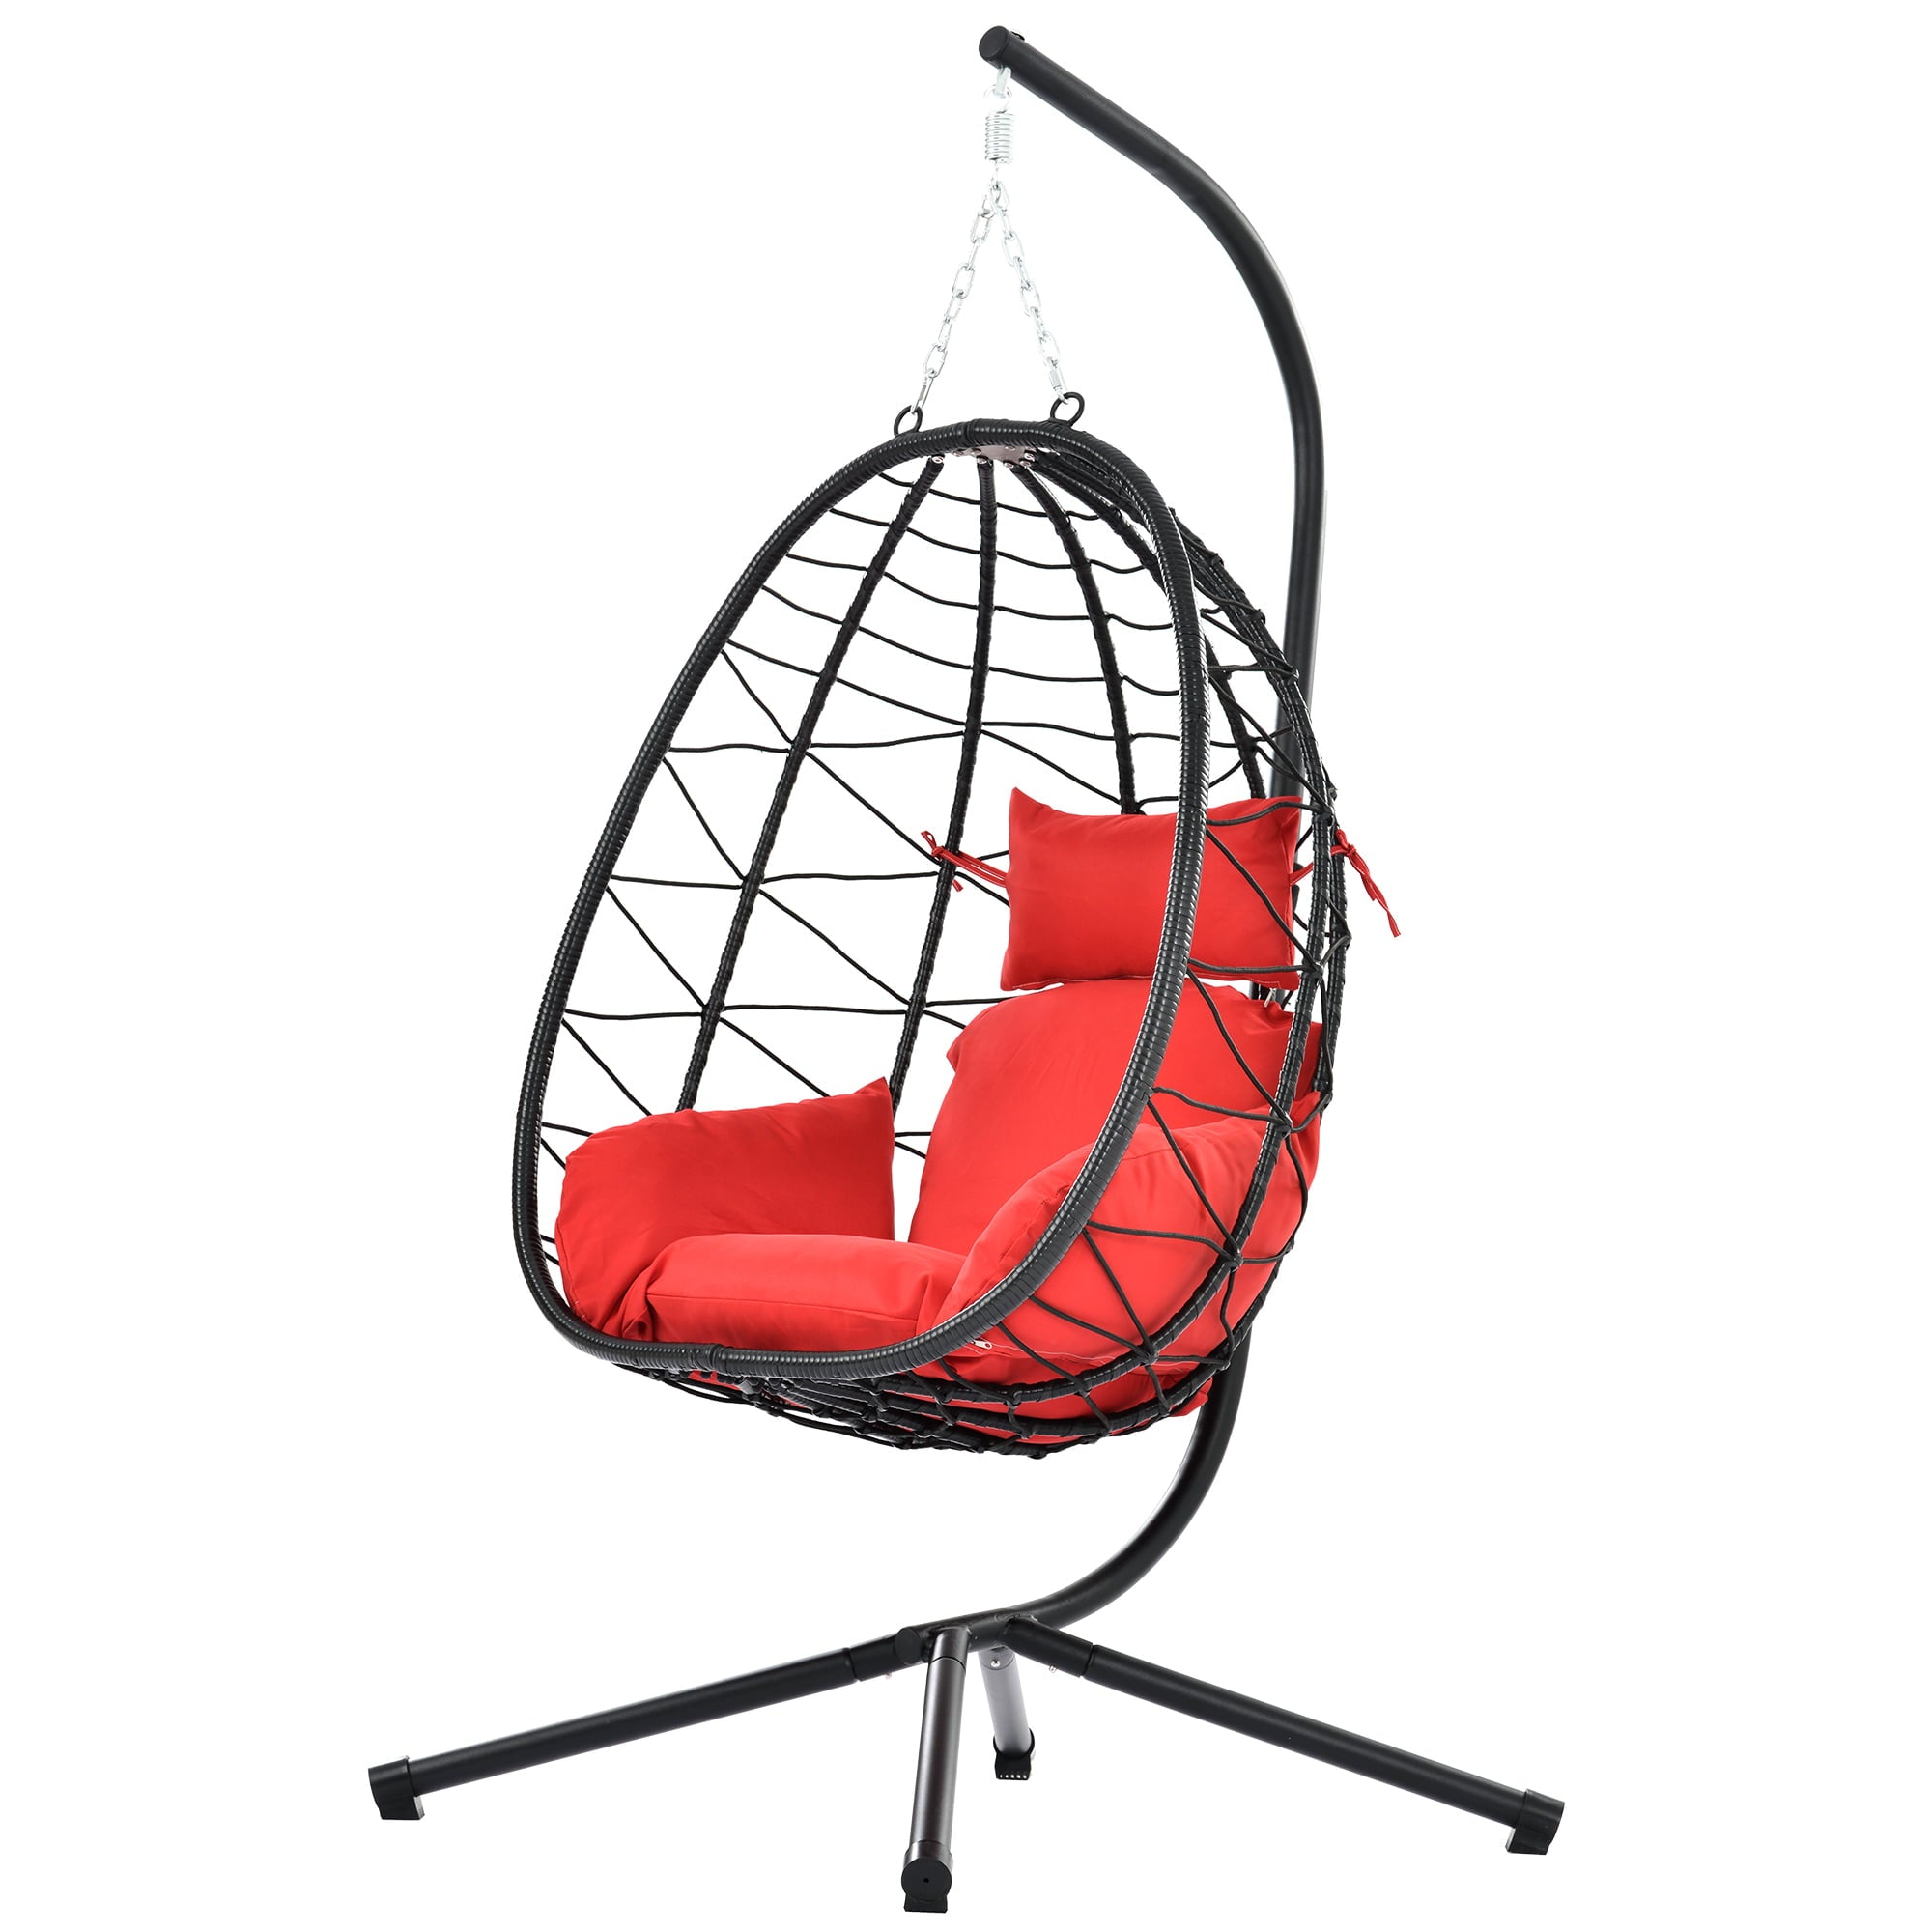 SYNGAR 2 Piece Indoor Outdoor Patio Wicker Hanging Chairs, Swing Hammock Egg Chairs Waterproof Cushions with Steel Frame, 300lbs Capacity for Patio Balcony Bedroom Living Room, Red